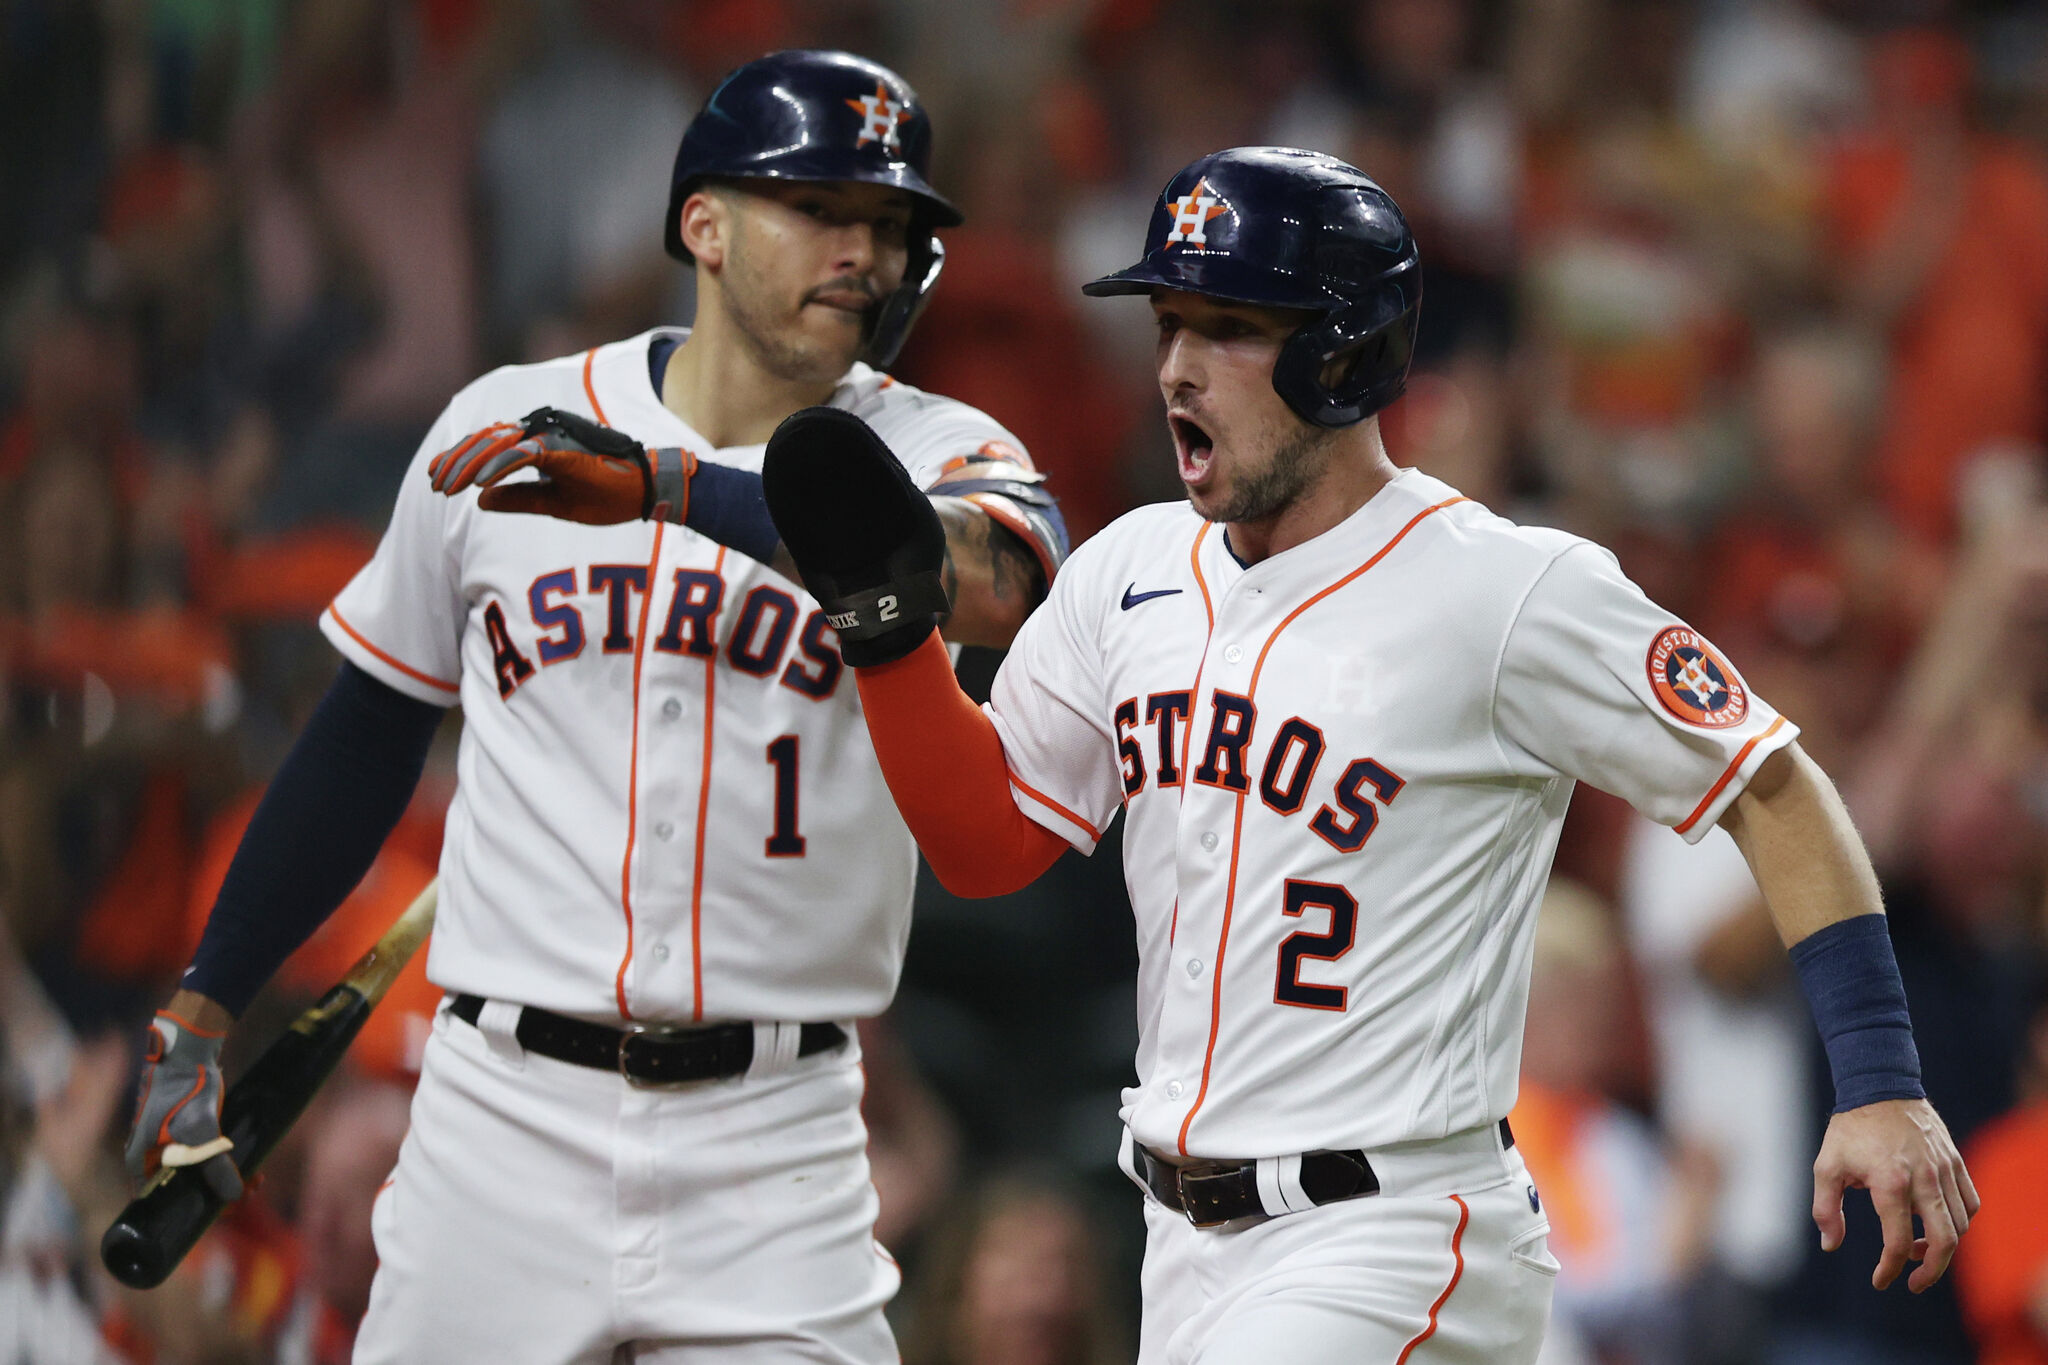 Best Astros players by uniform number